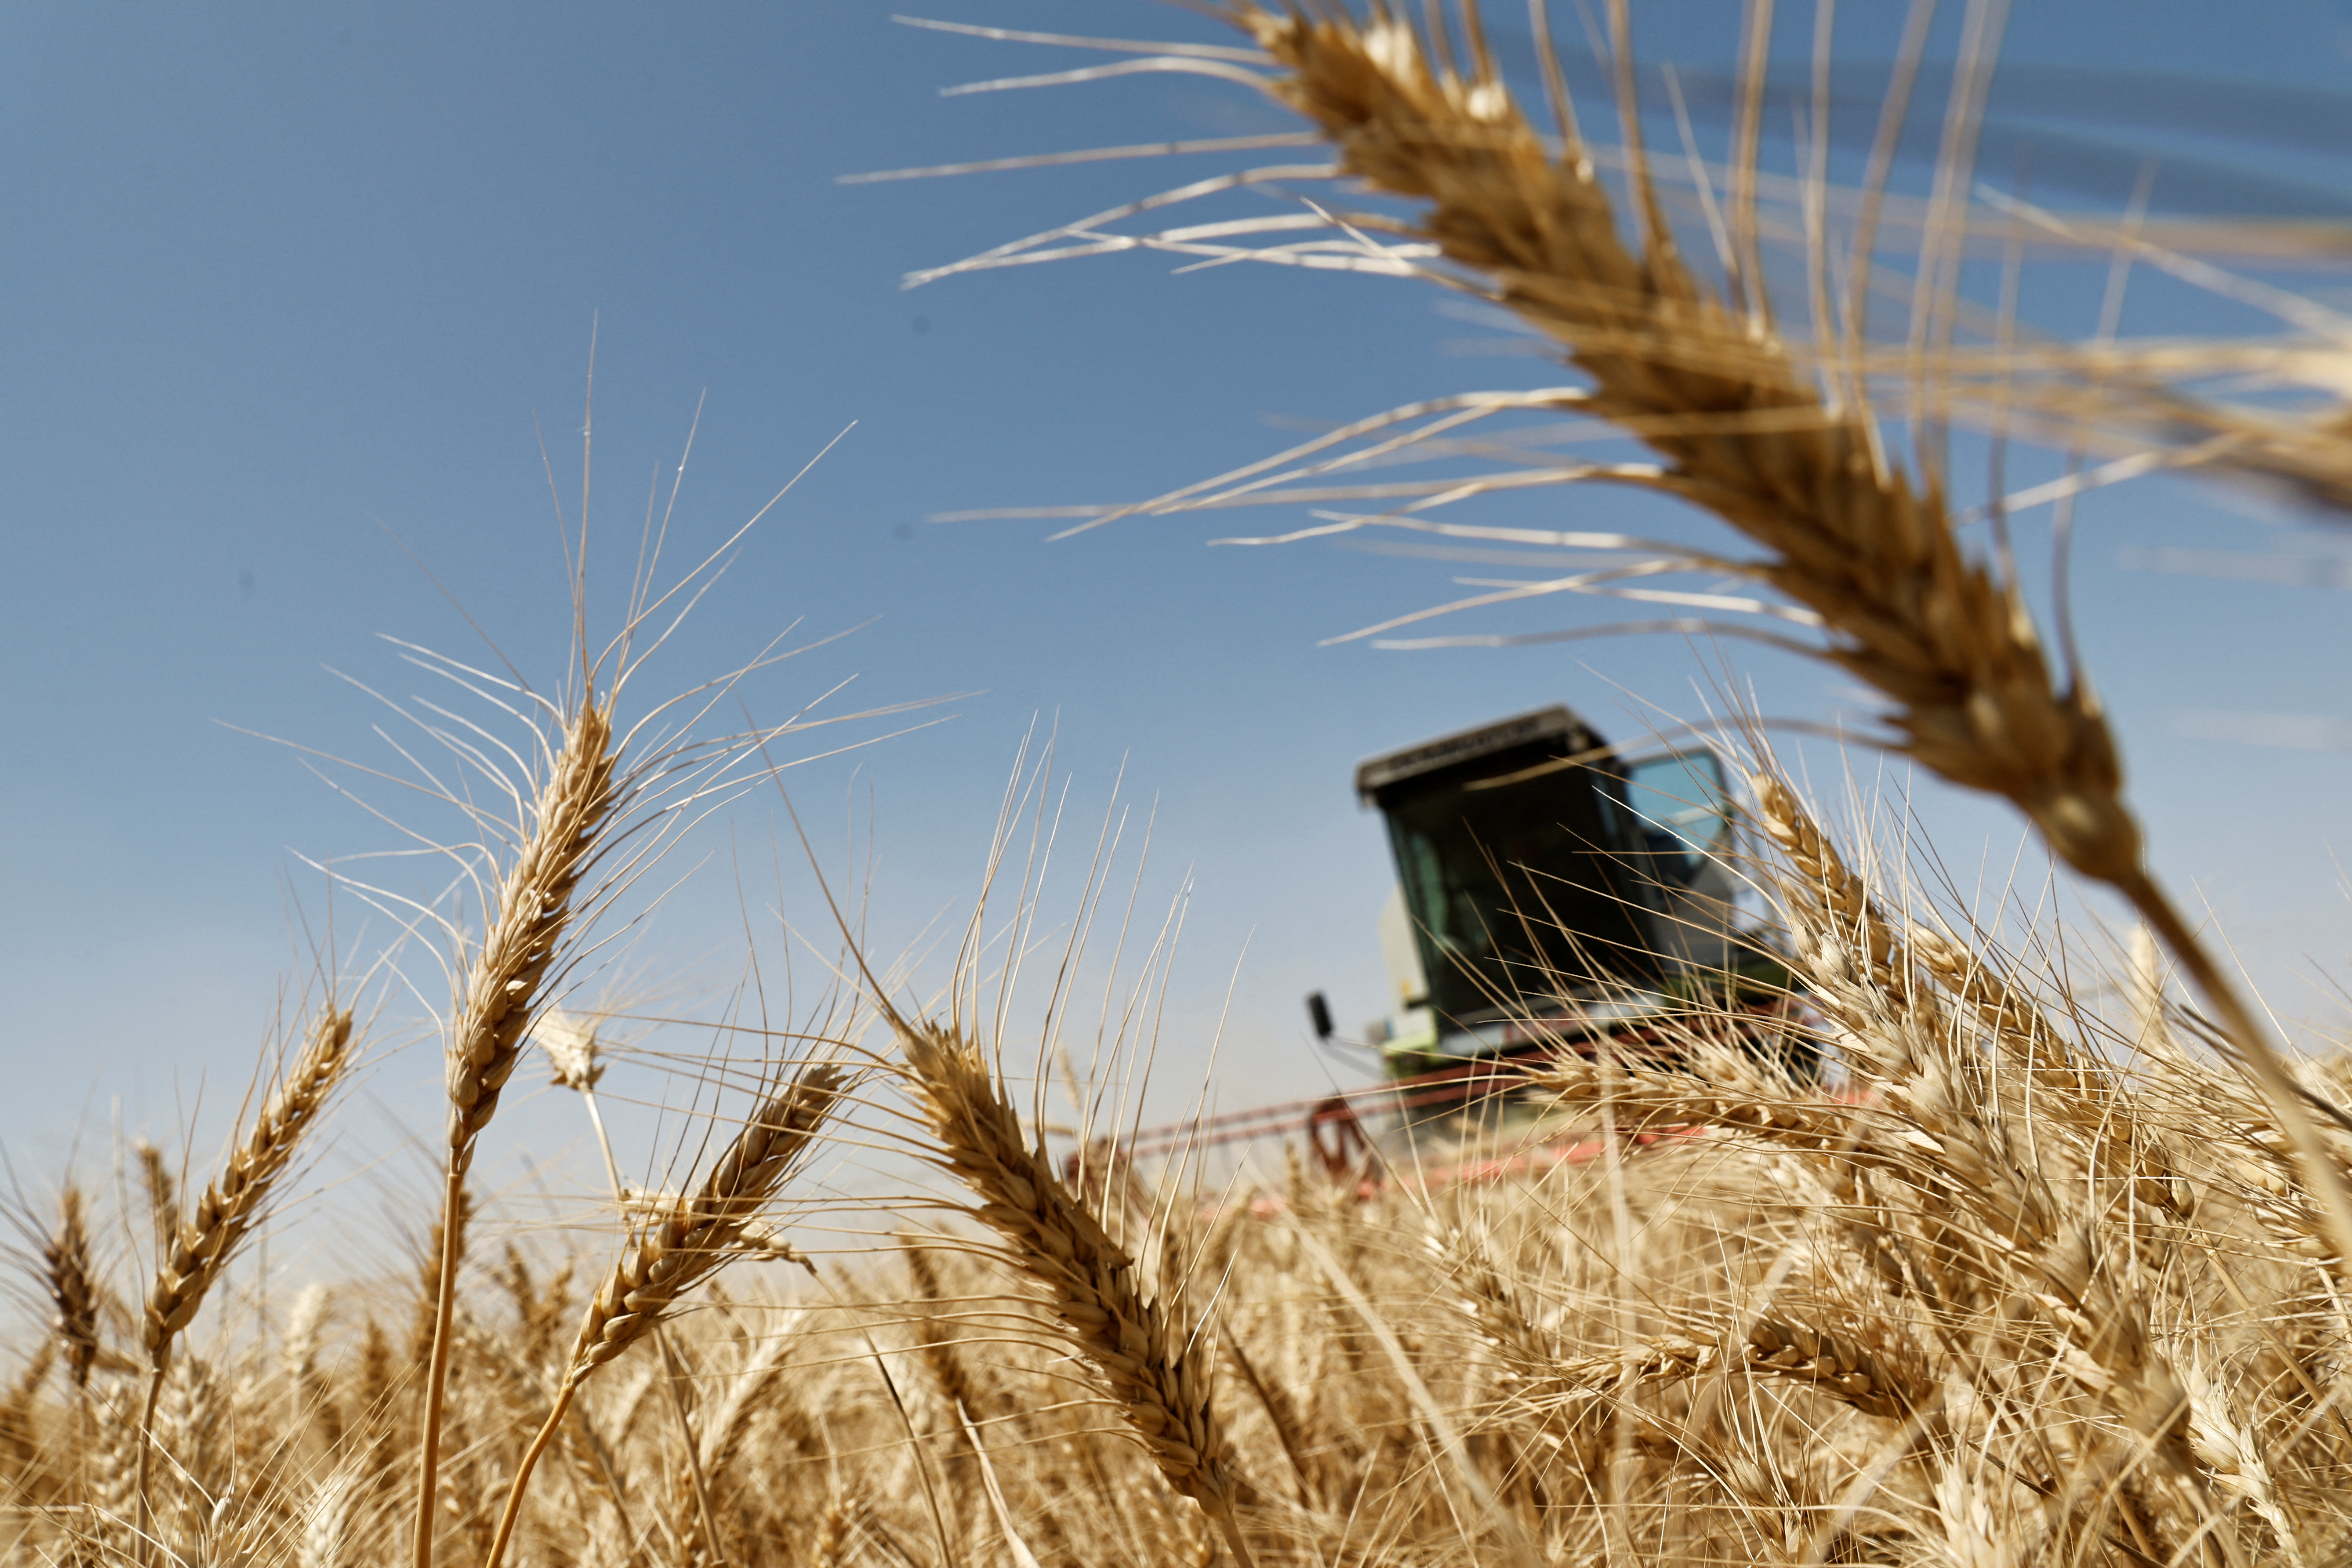 A view shows wheat that has dried before the start of the harvesting season in a field on the outskirts of Karbala